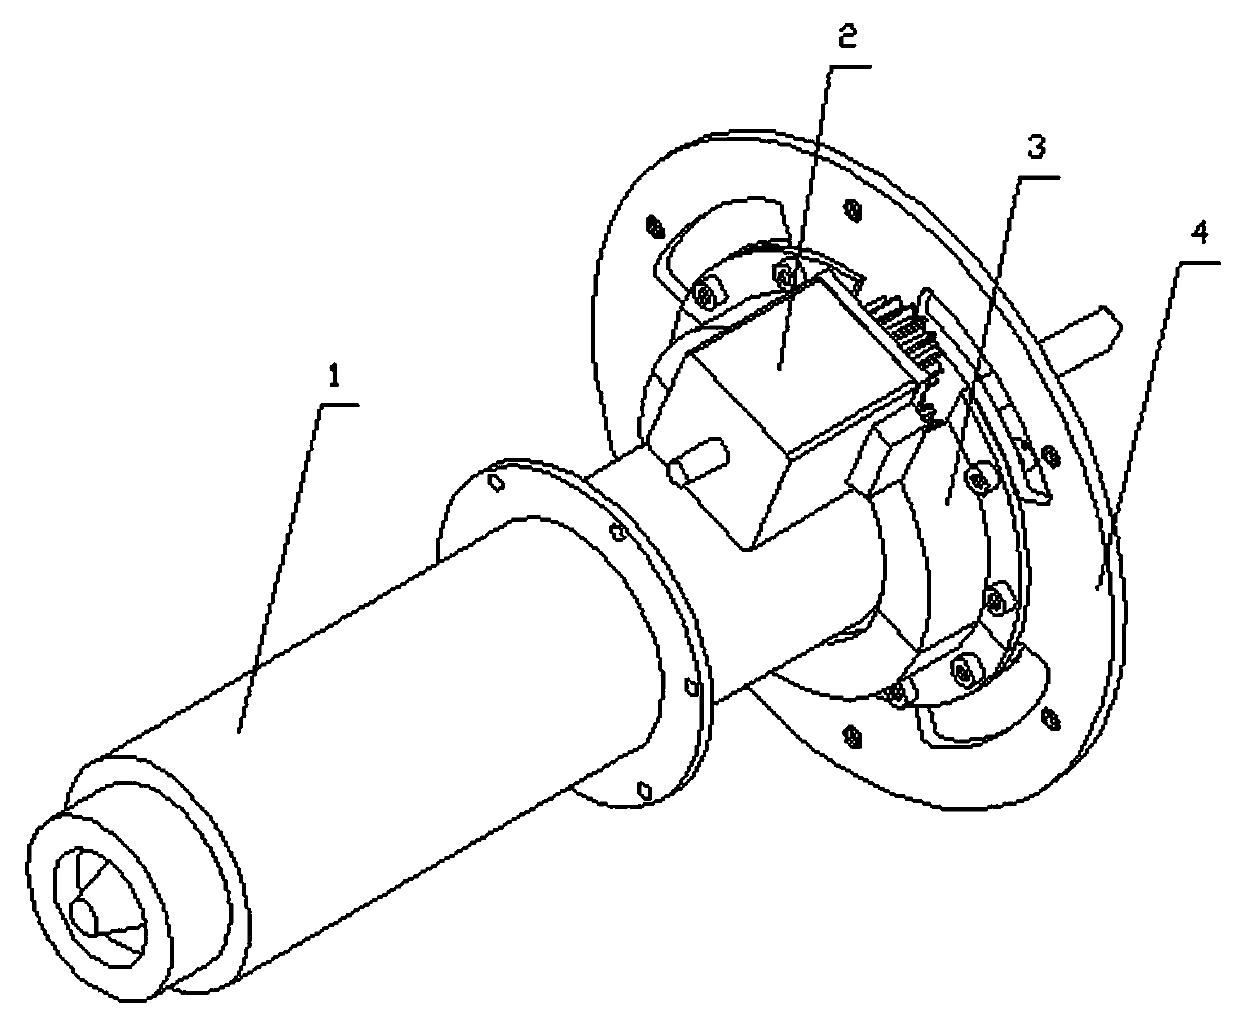 A telescopic locking mechanism driven by a leading screw